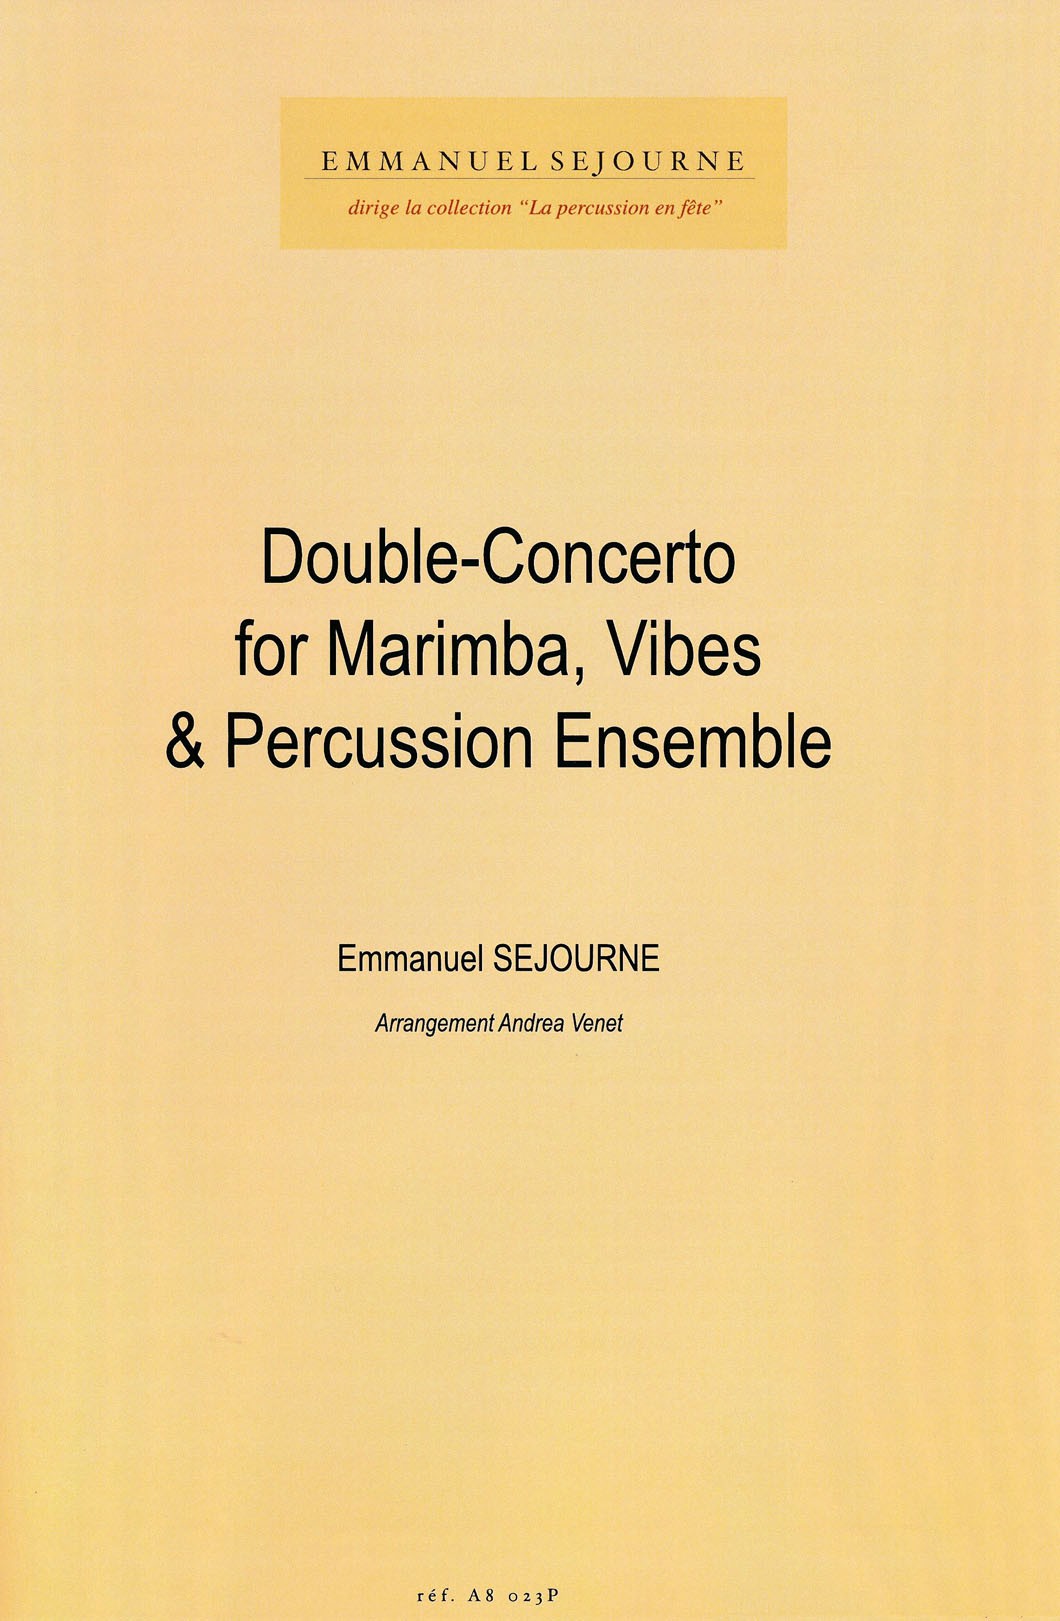 Double-Concerto for Marimba, Vibes and Percussion Ensemble by Emmanuel Sejourne